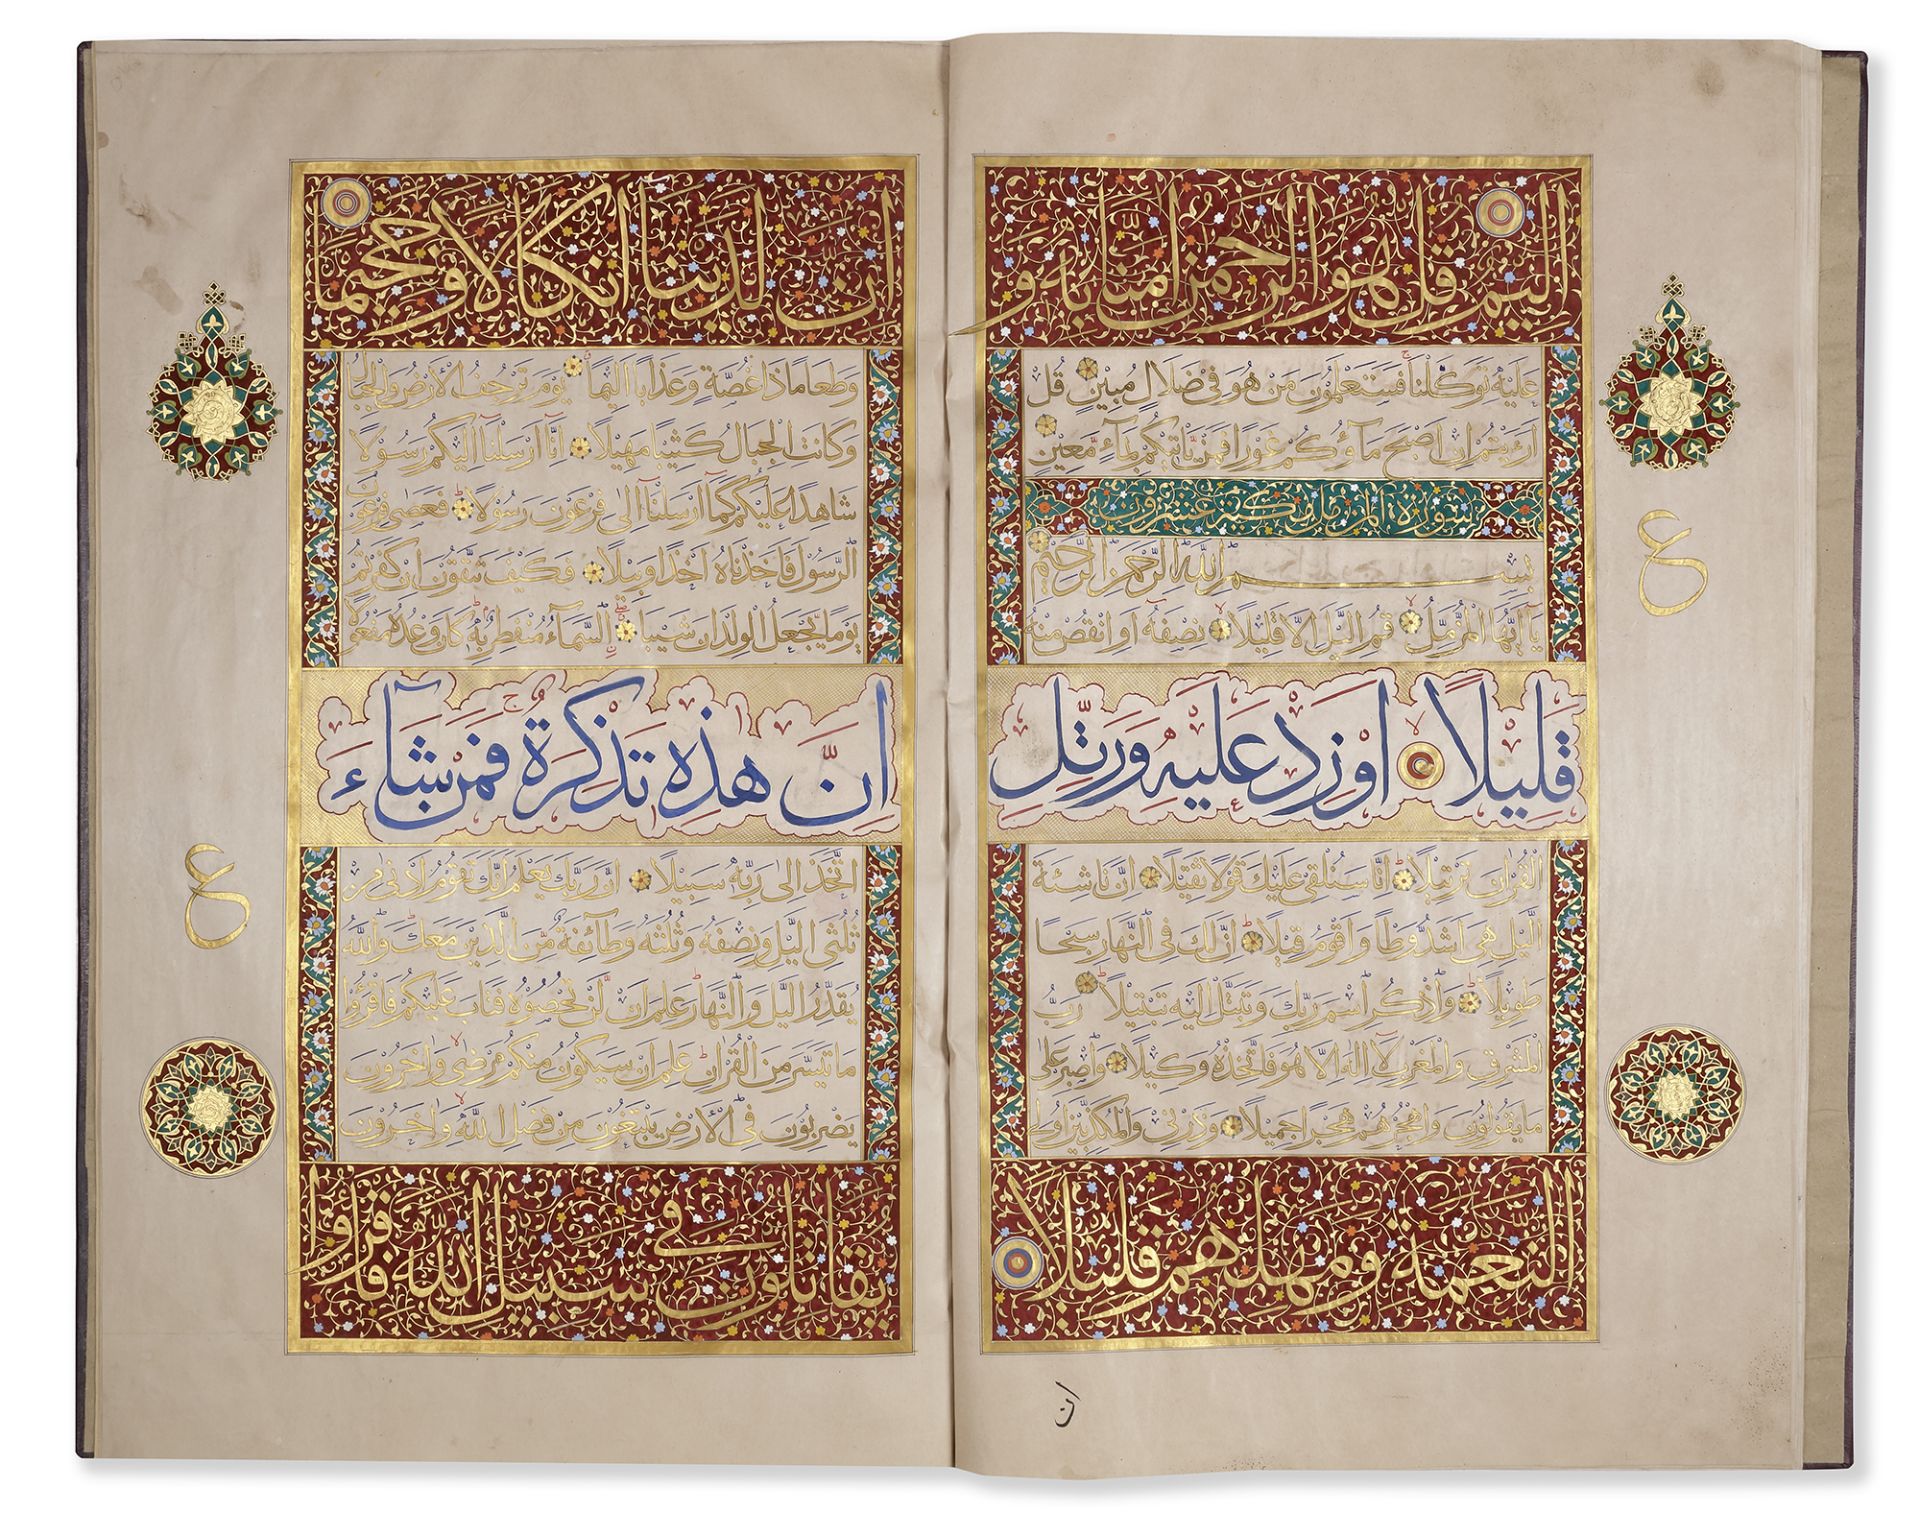 A LARGE ILLUMINATED QURAN JUZ, CENTRAL ASIA, LATE 19TH-EARLY 20TH CENTURY - Bild 5 aus 6